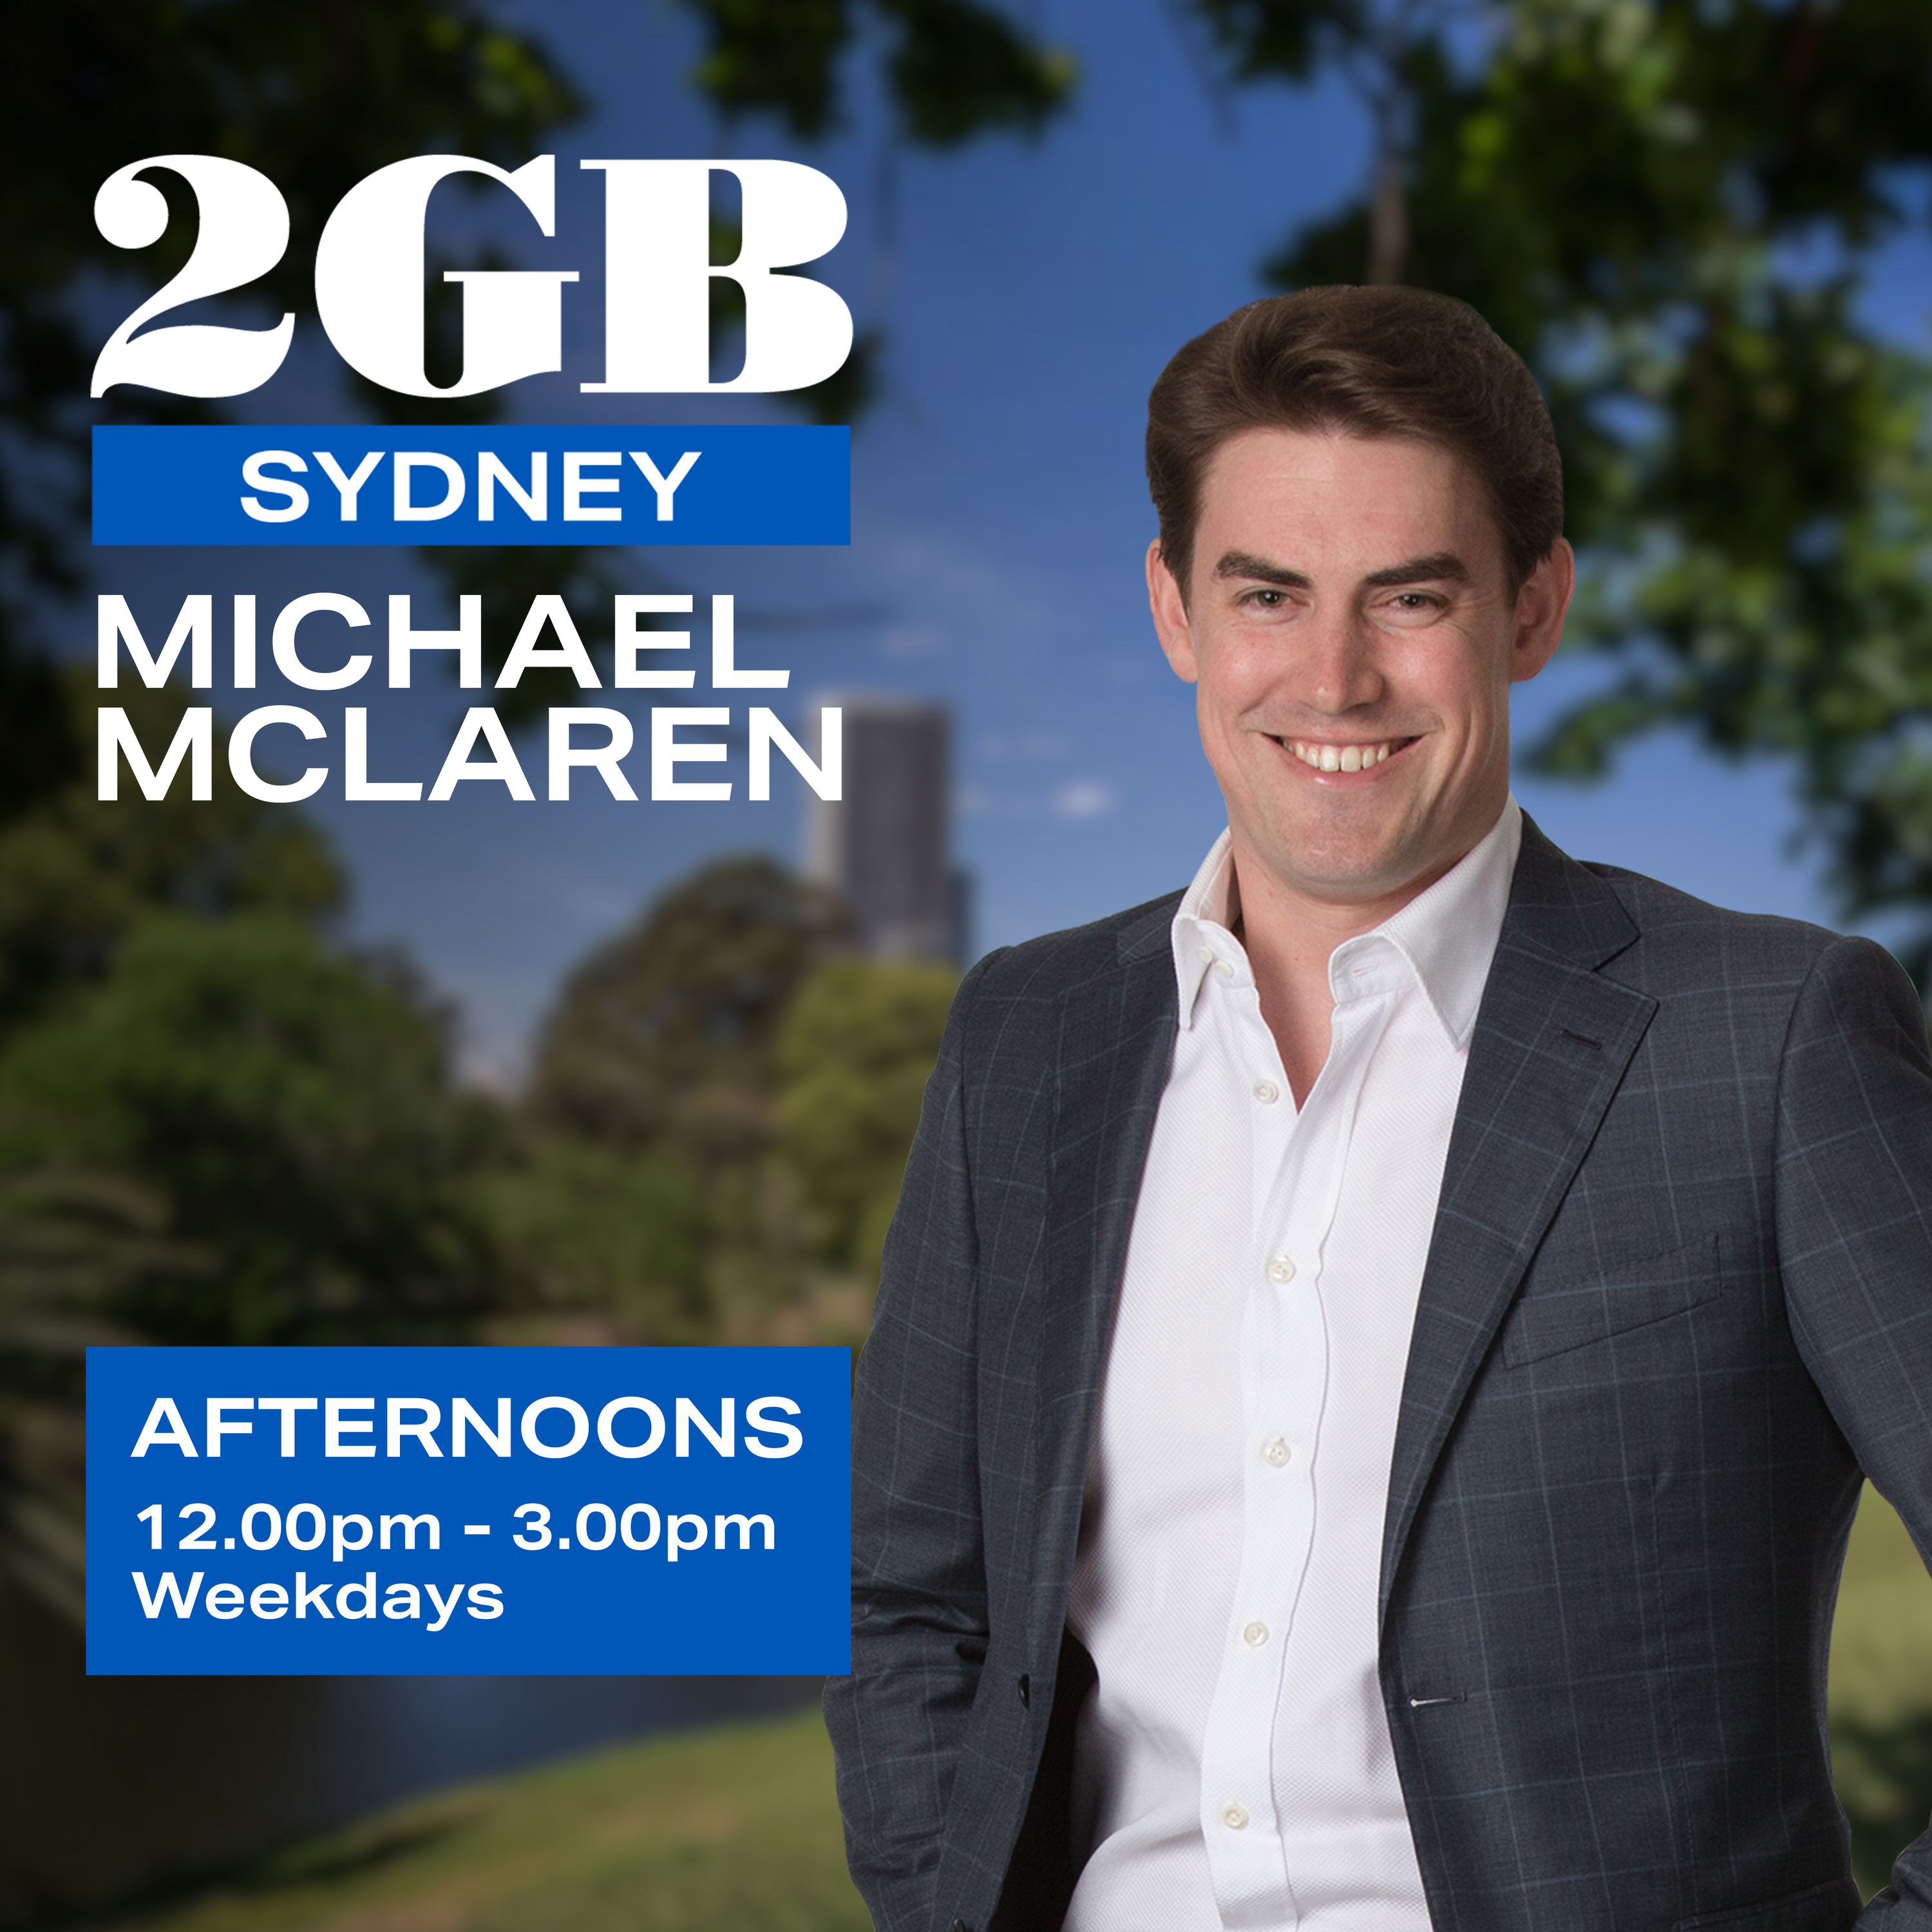 Afternoons with Michael McLaren - Thursday, 23rd May